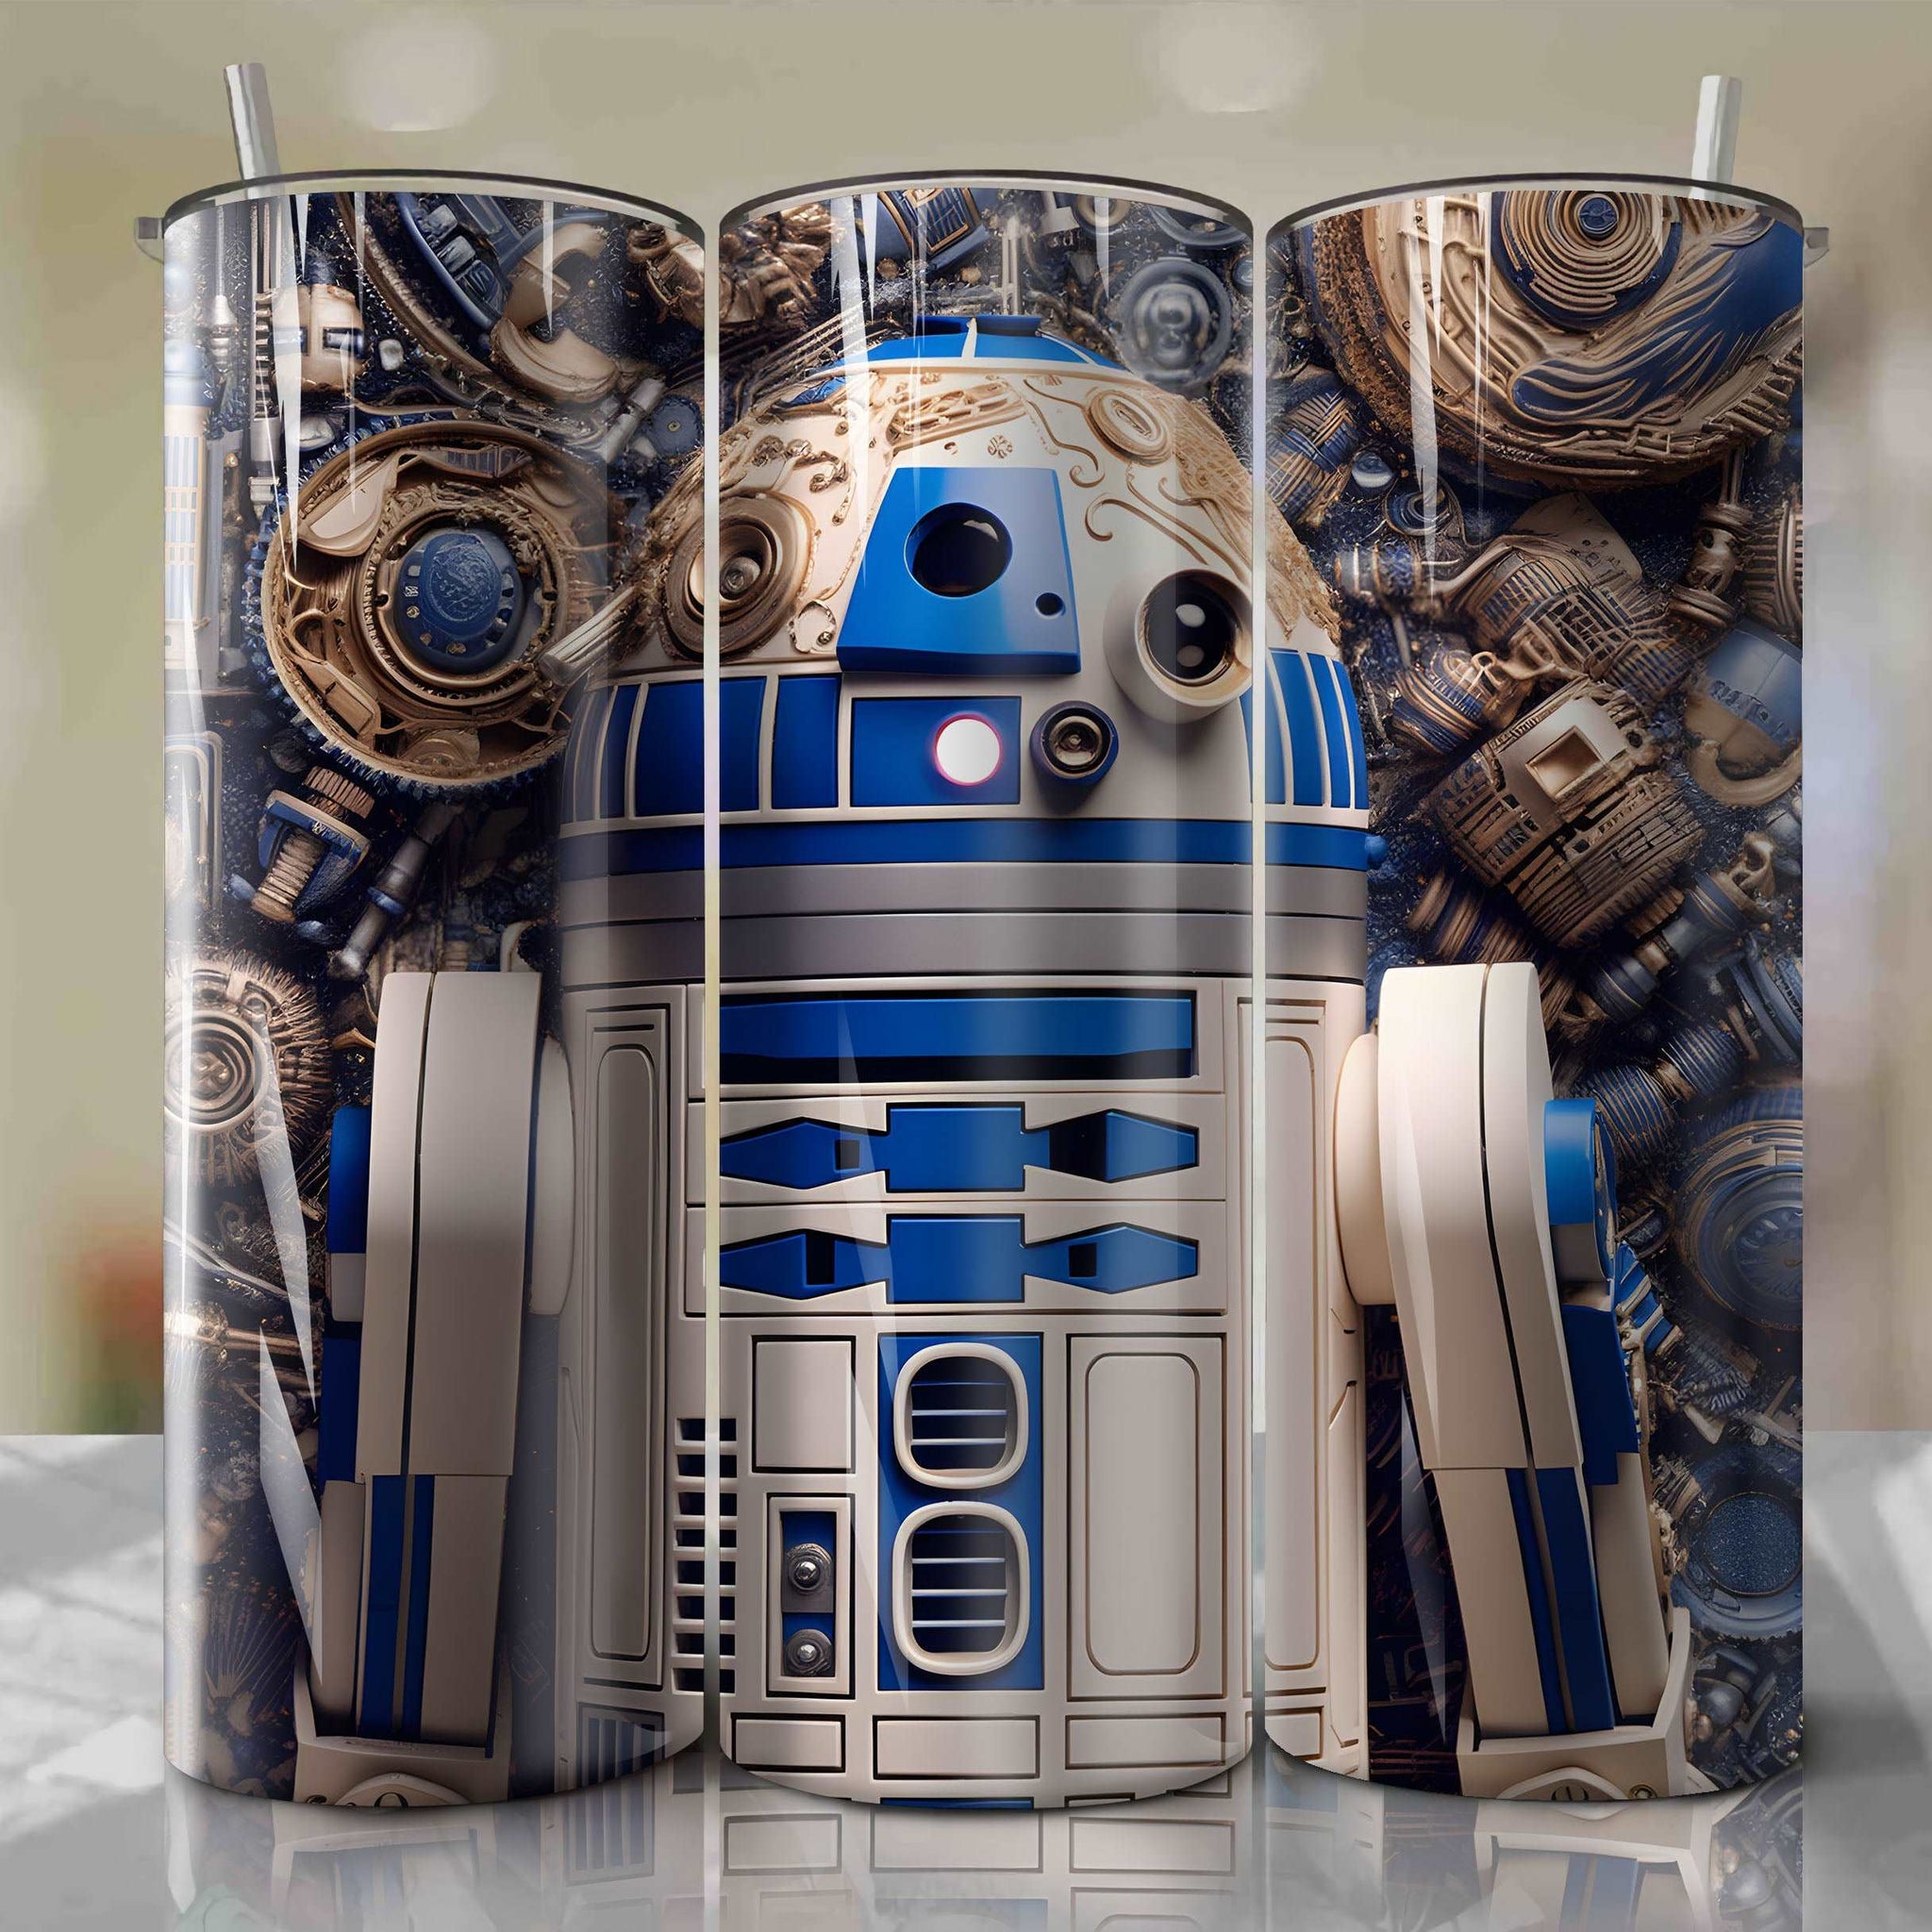 Buy 2 X R2D2 Personalised Birthday Wrapping Paper Star Wars Personalised  Gift Wrap R2D2 Wrapping Paper R2D2 Star Wars Wrapping Paper Online in India  